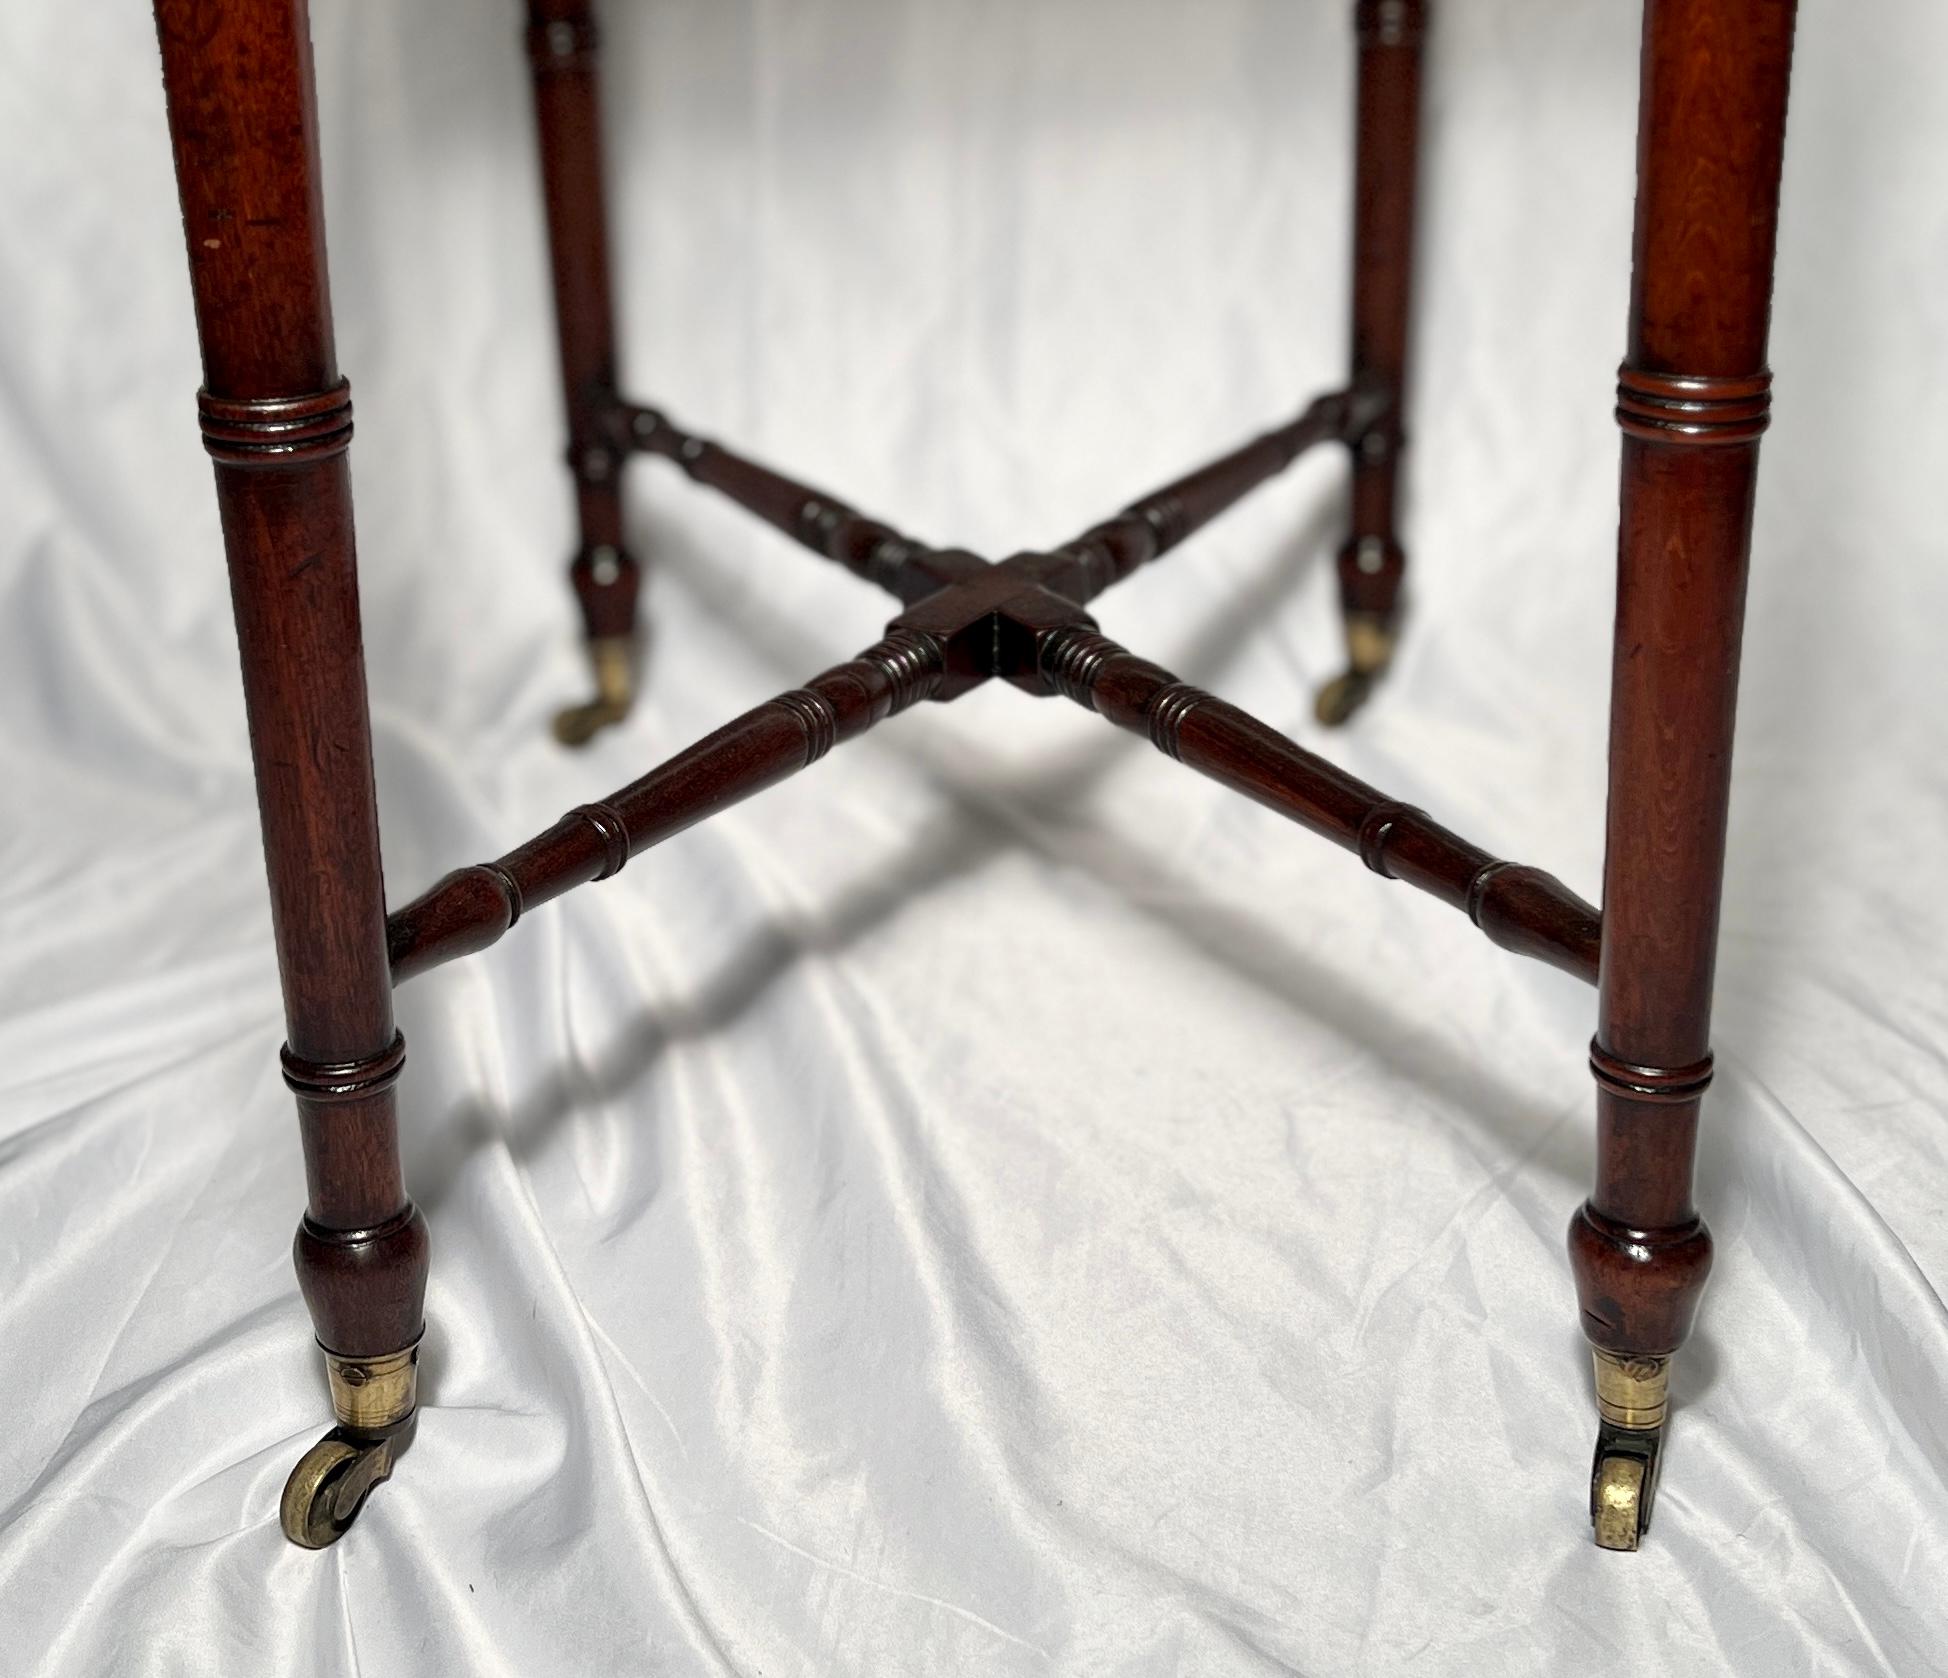 Antique English William IV Pembroke Table
Open to 26 inches